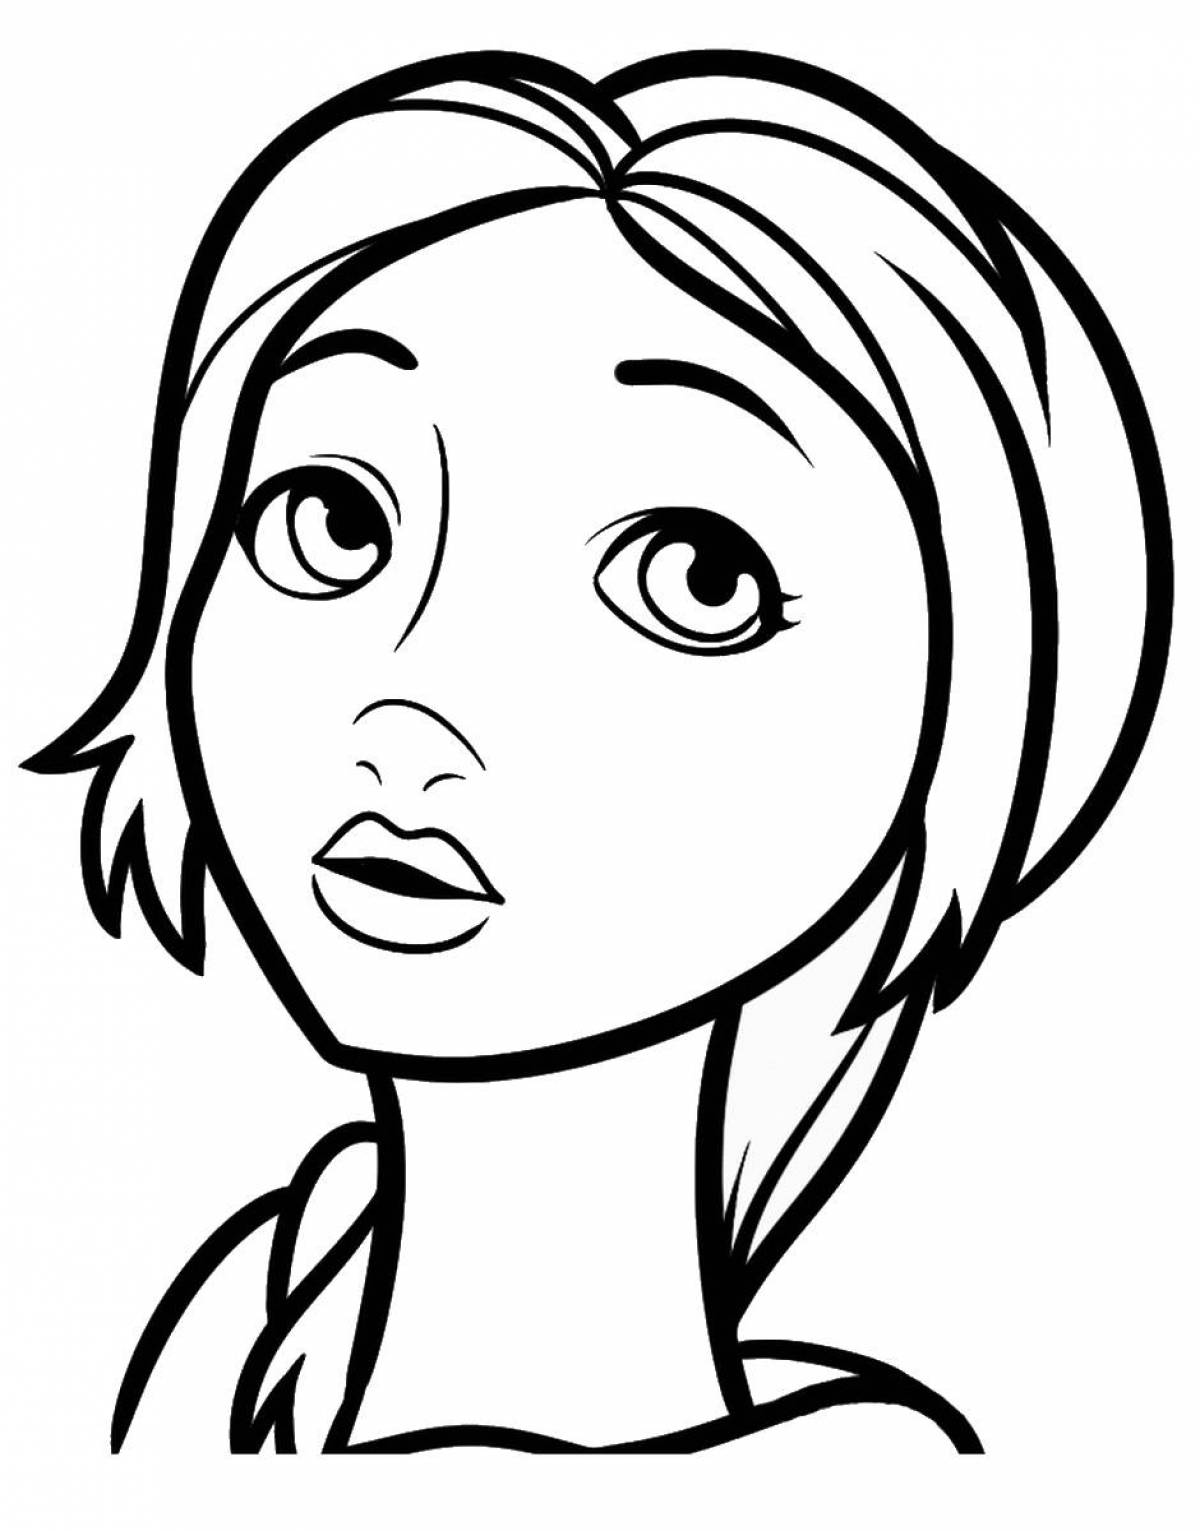 Animated human face coloring page